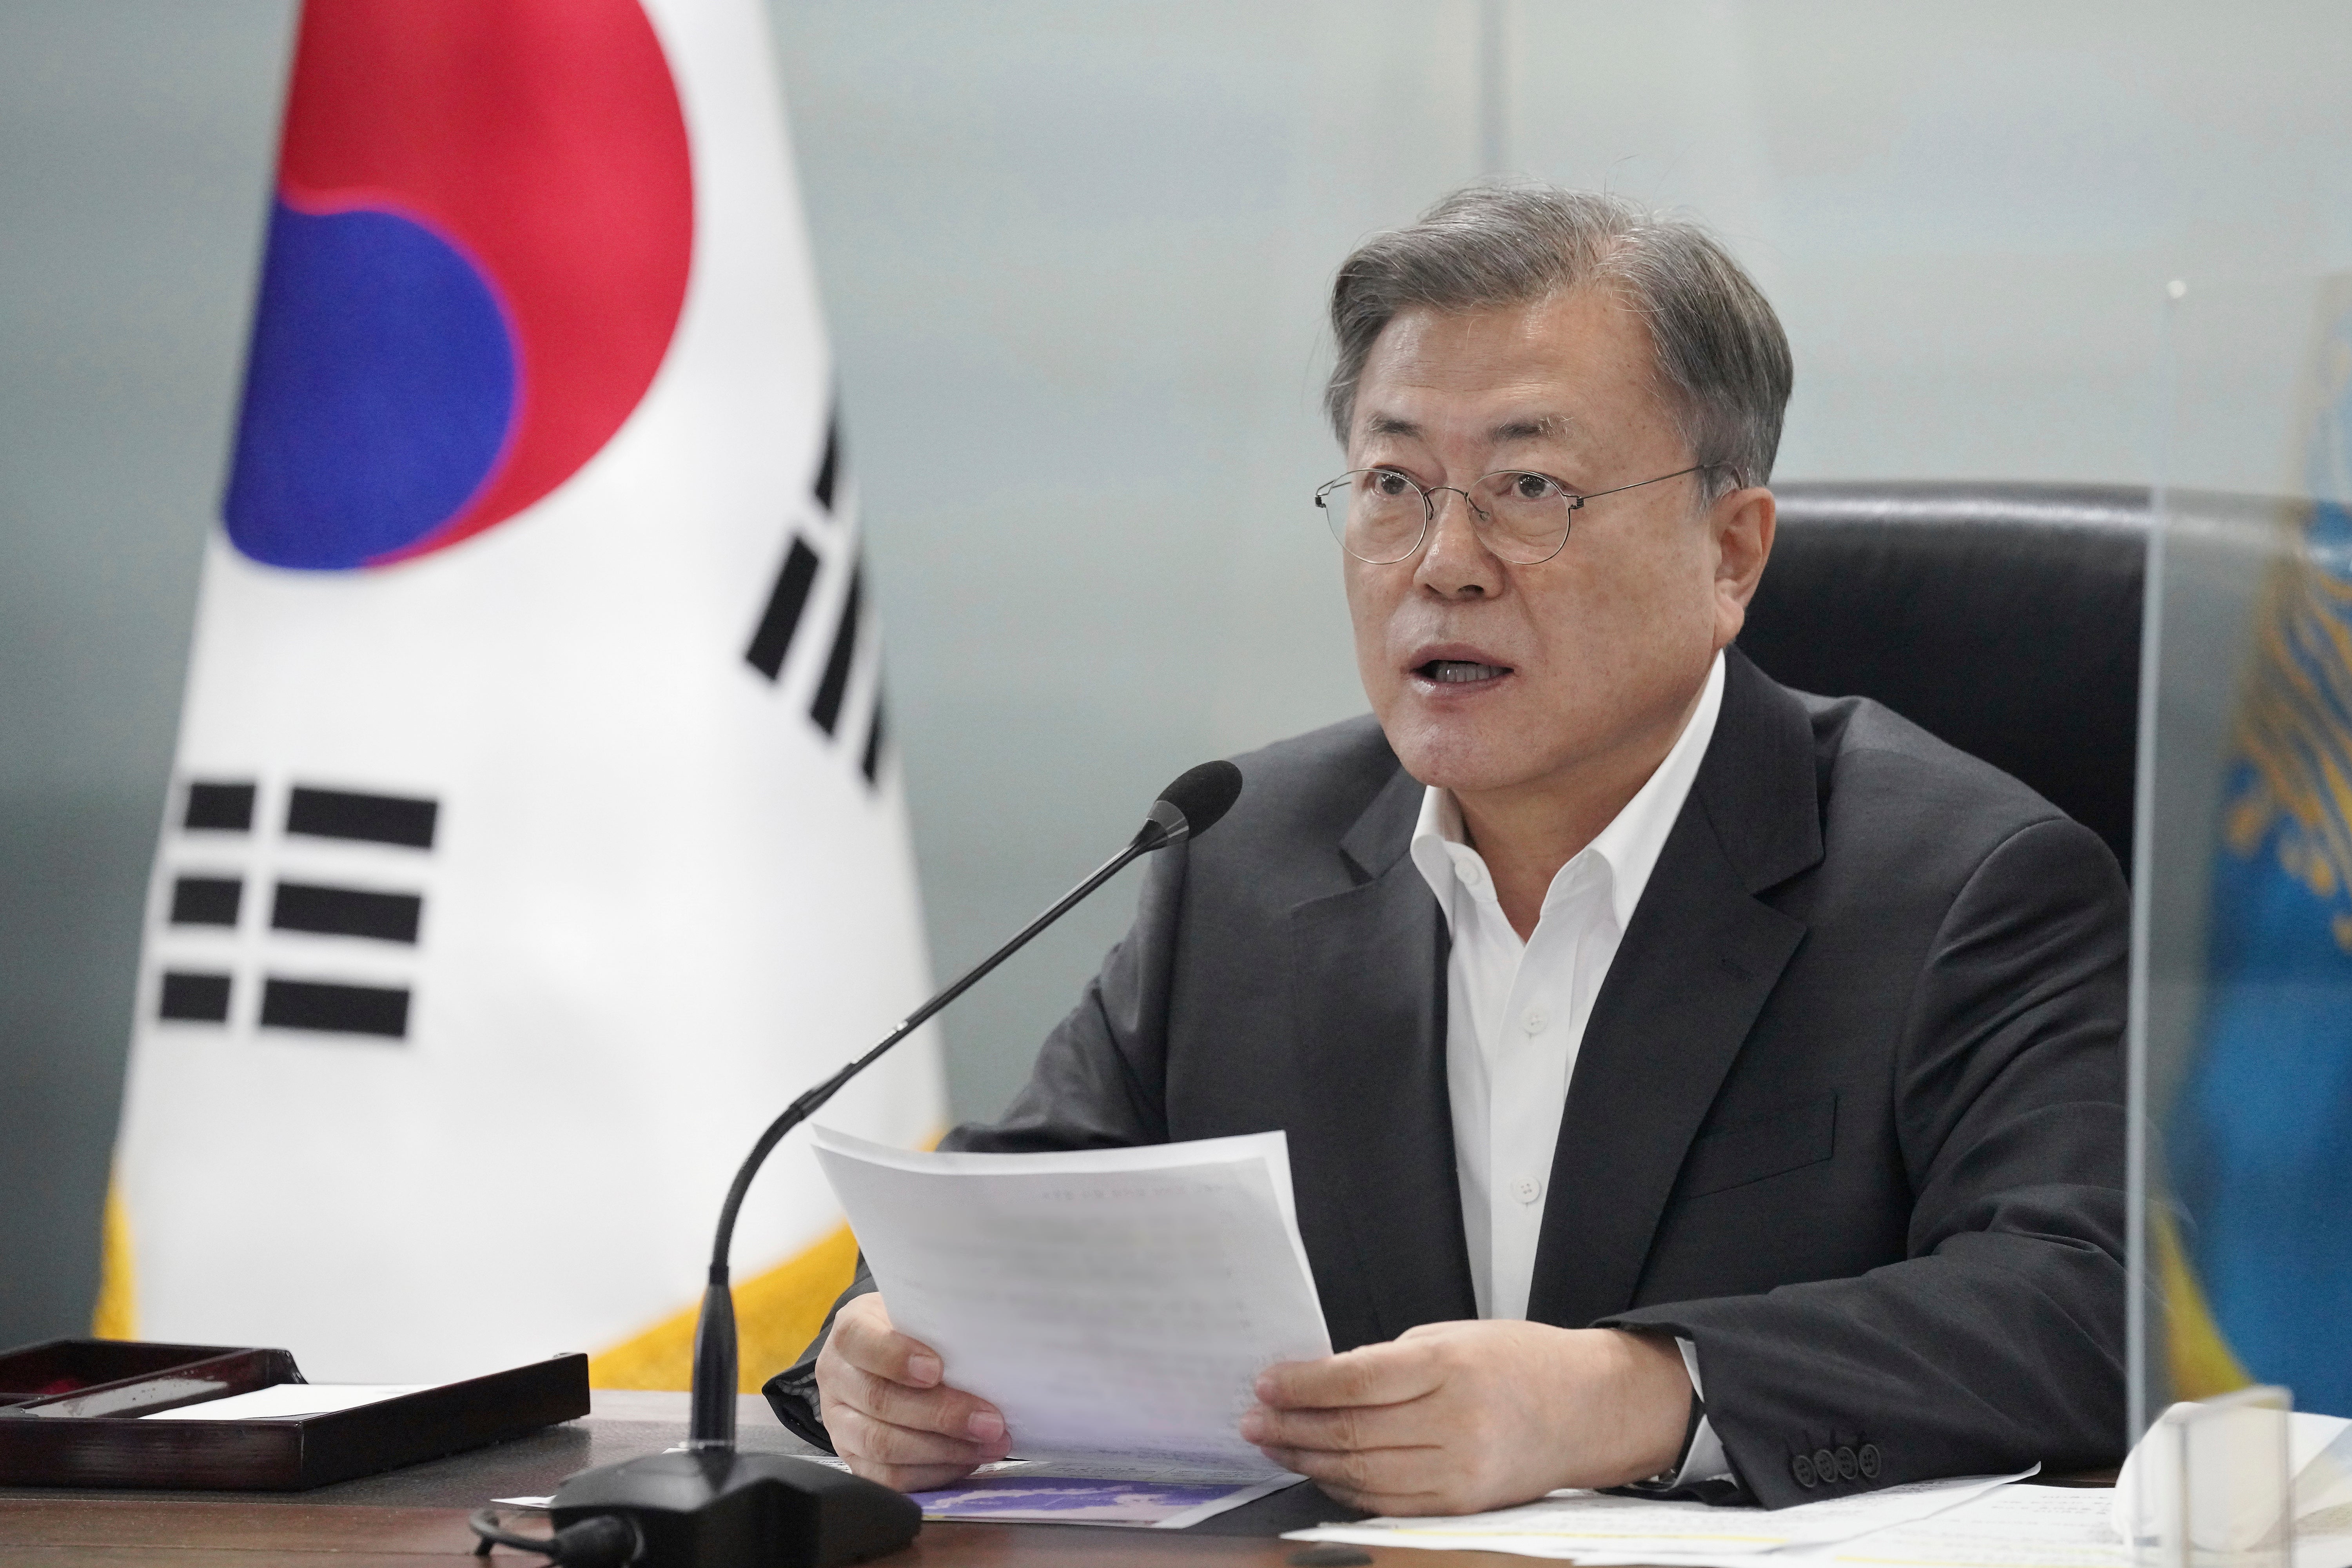 South Korean President Moon Jae-in speaks during a meeting of the National Security Council